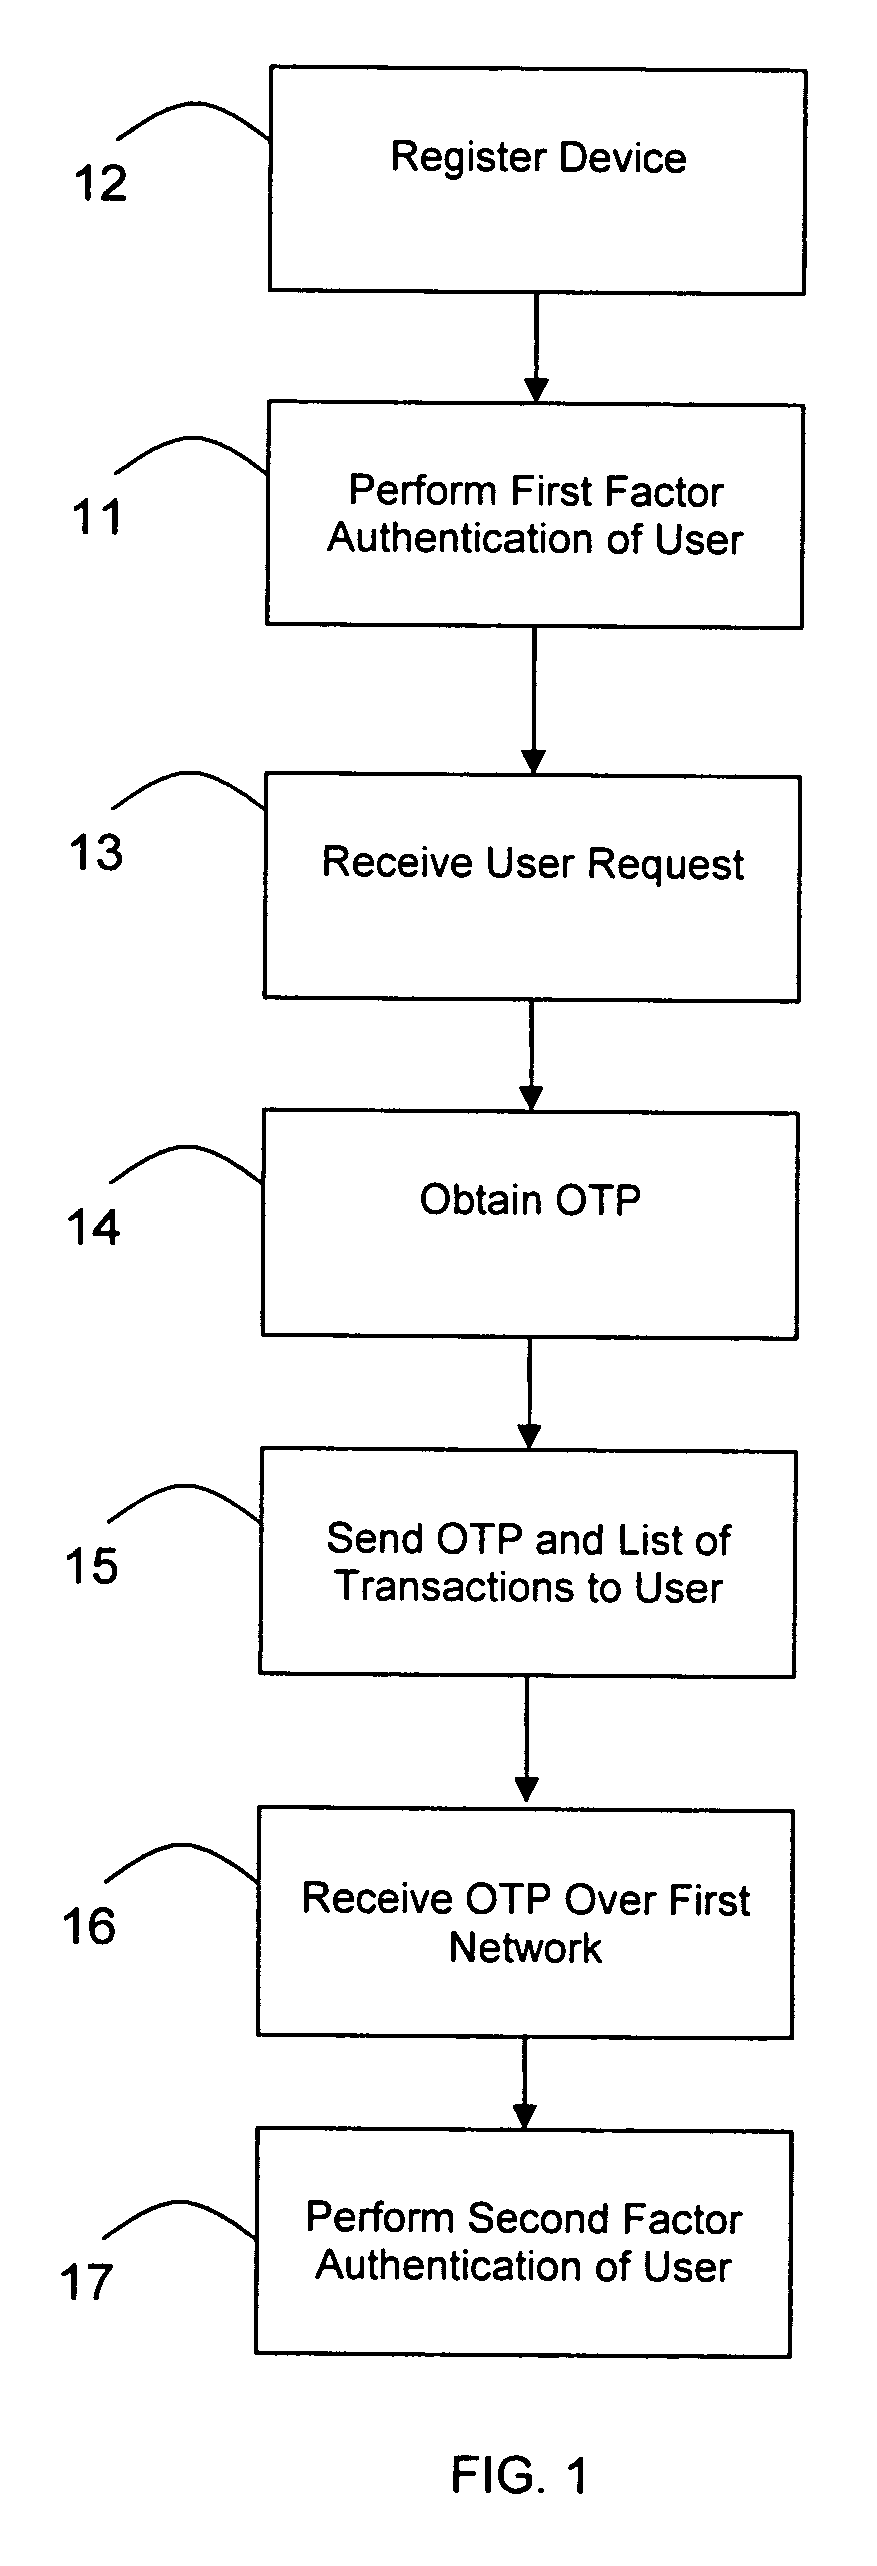 Transaction authentication over independent network